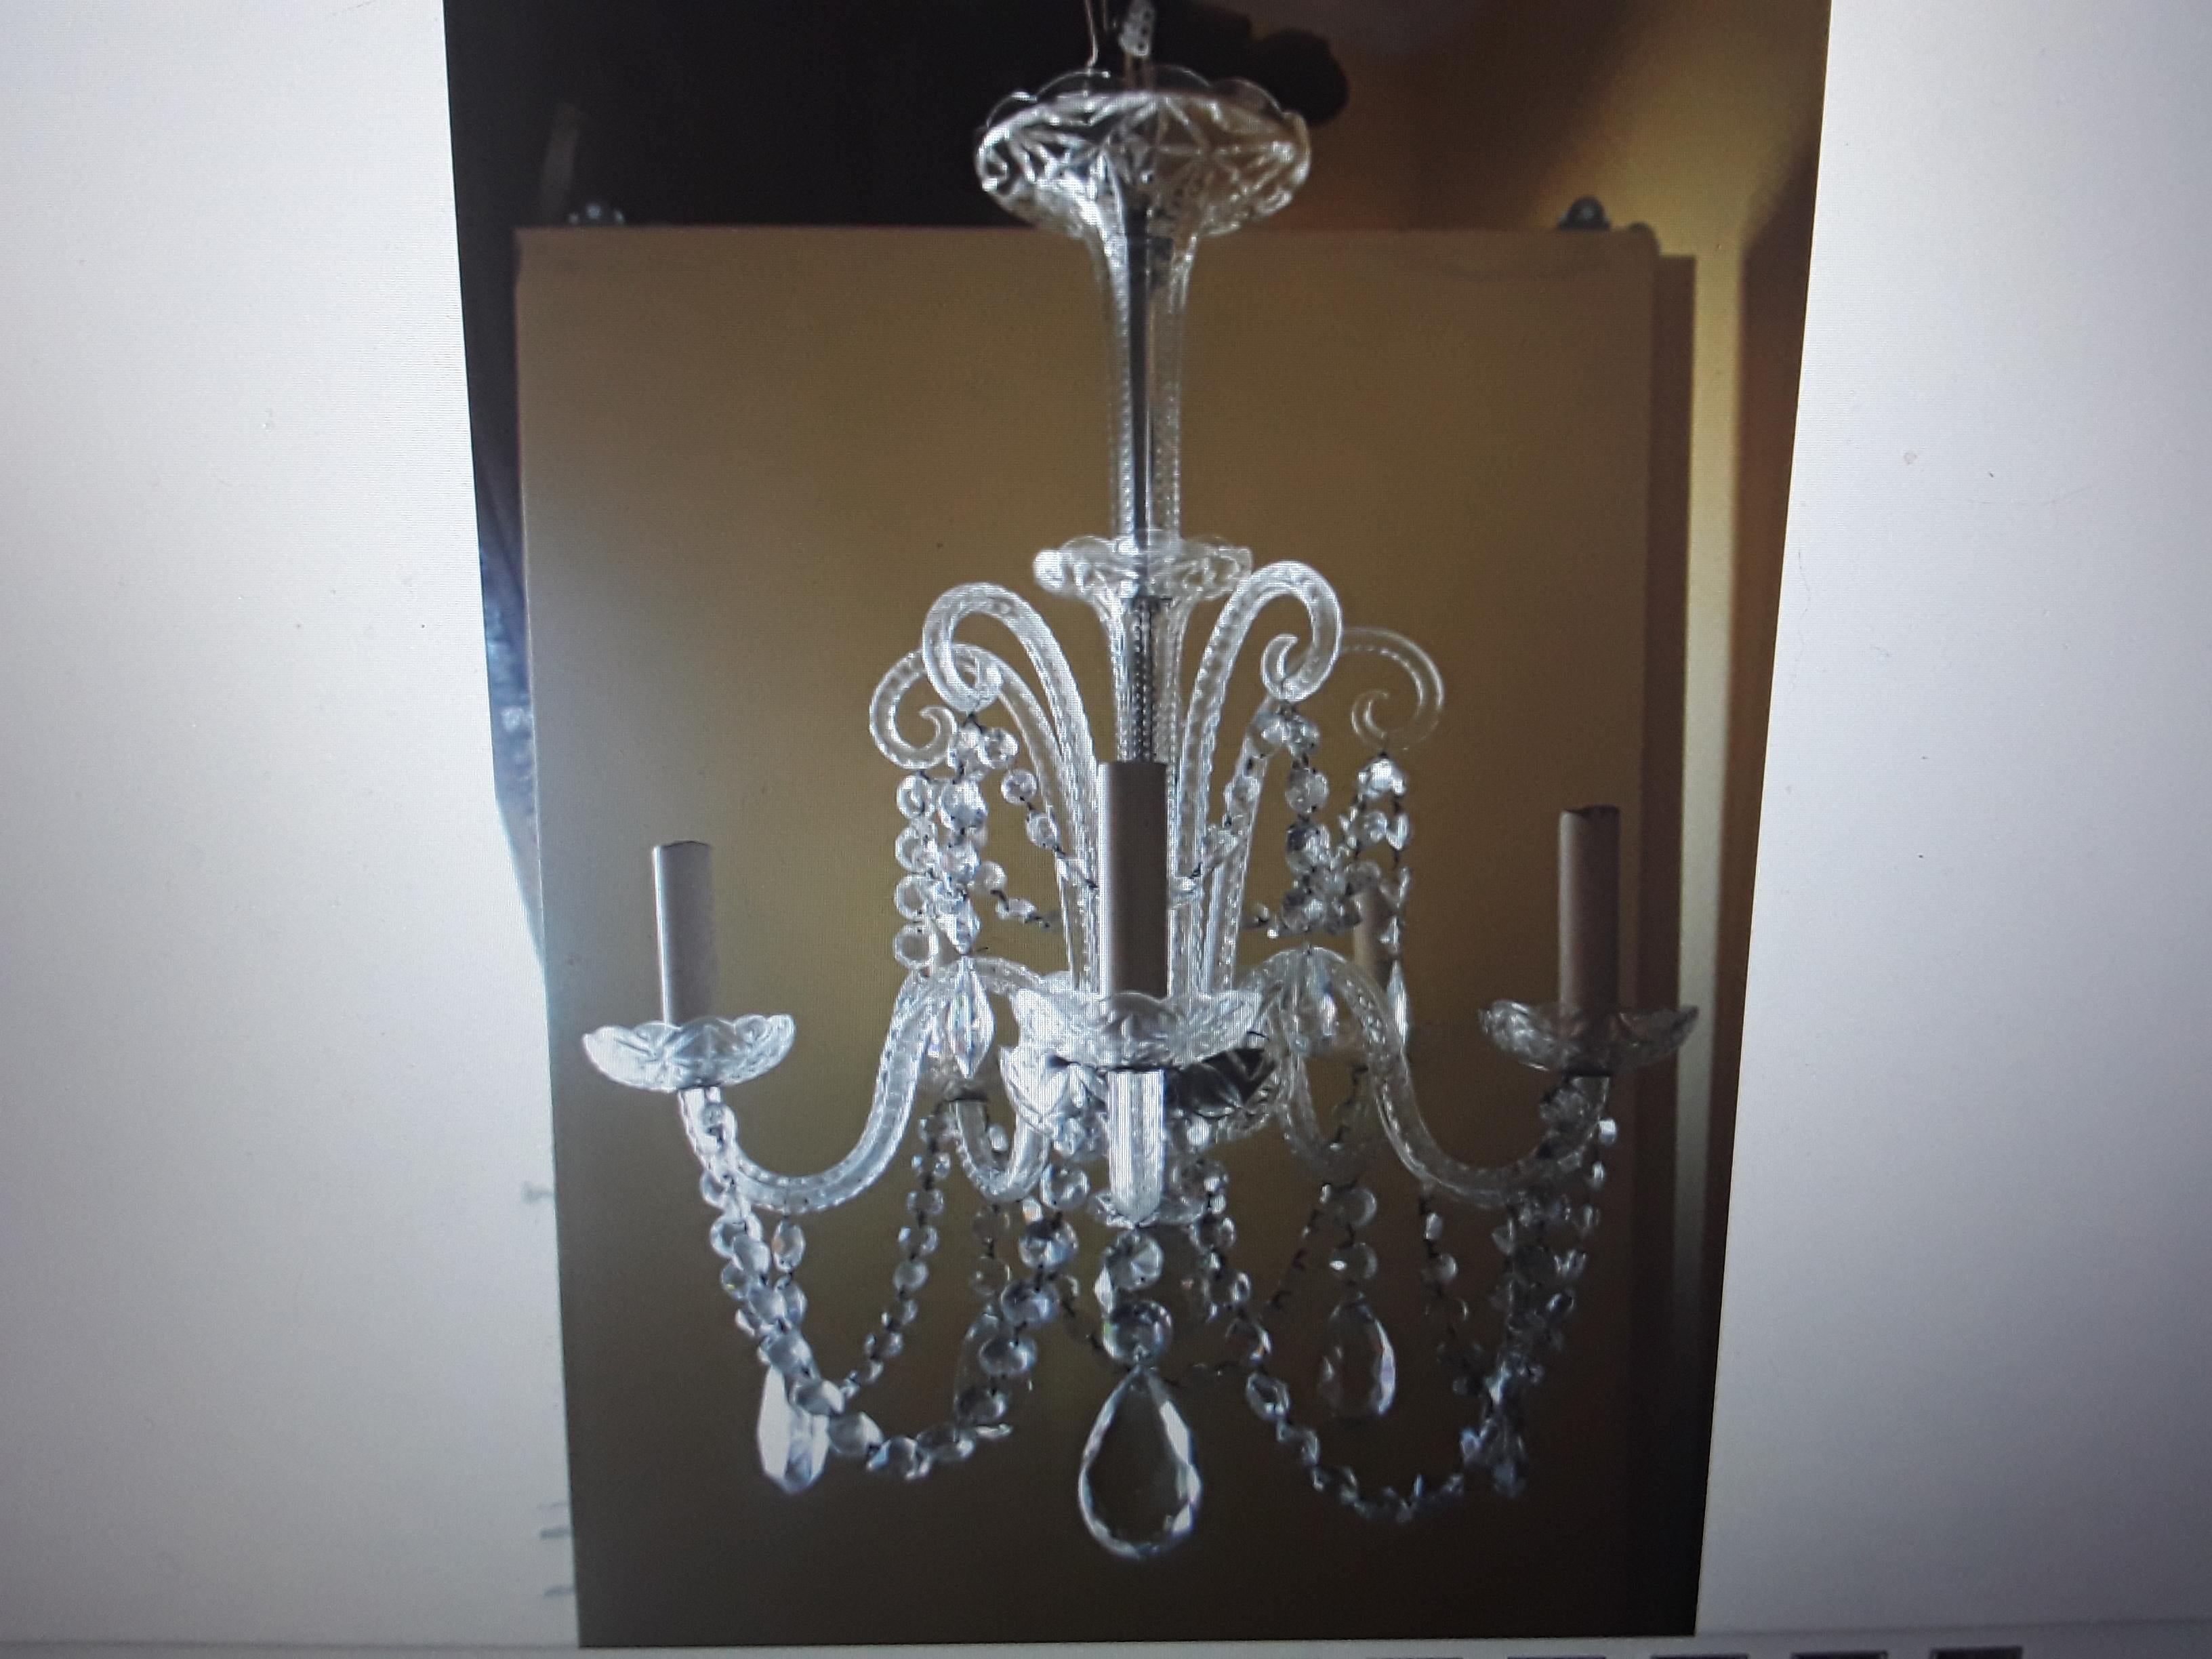 c1890-1900 Antique Anglo-Irish Traditional Cut Leaded Crystal Chandelier For Sale 8